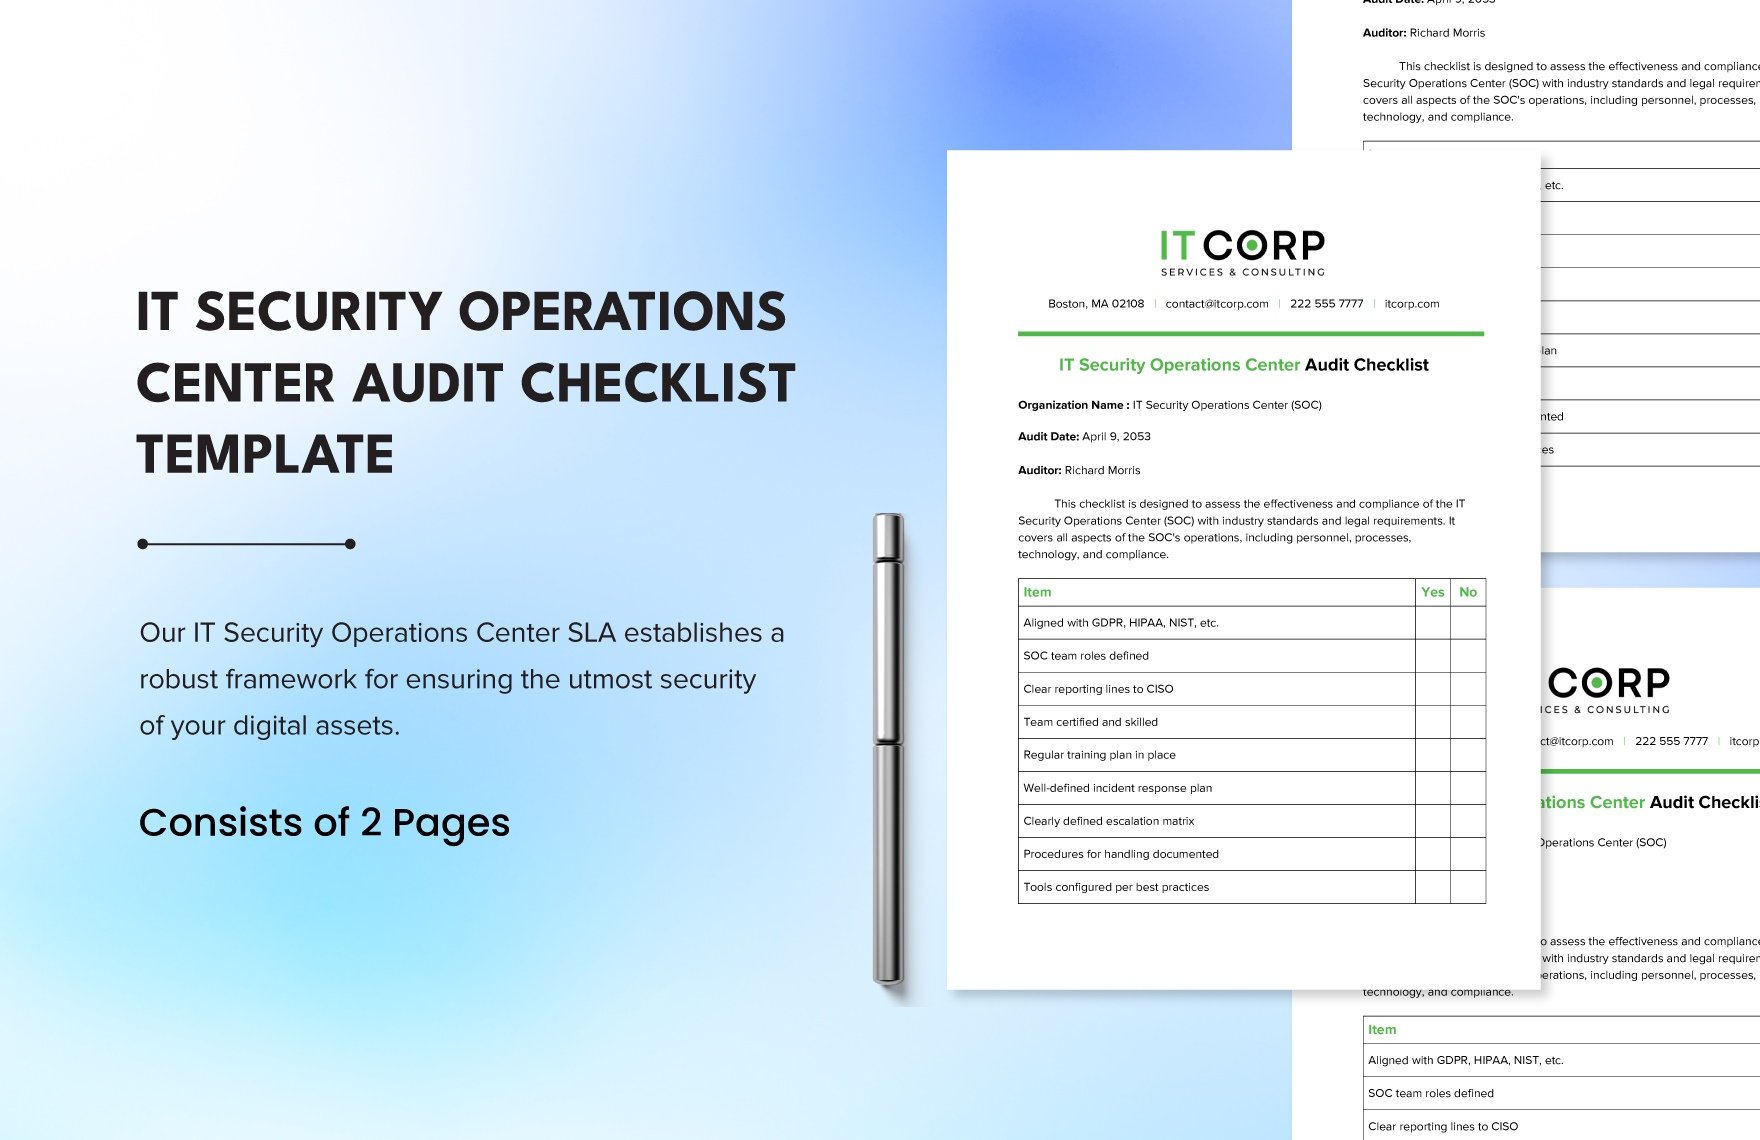 IT Security Operations Center Audit Checklist Template